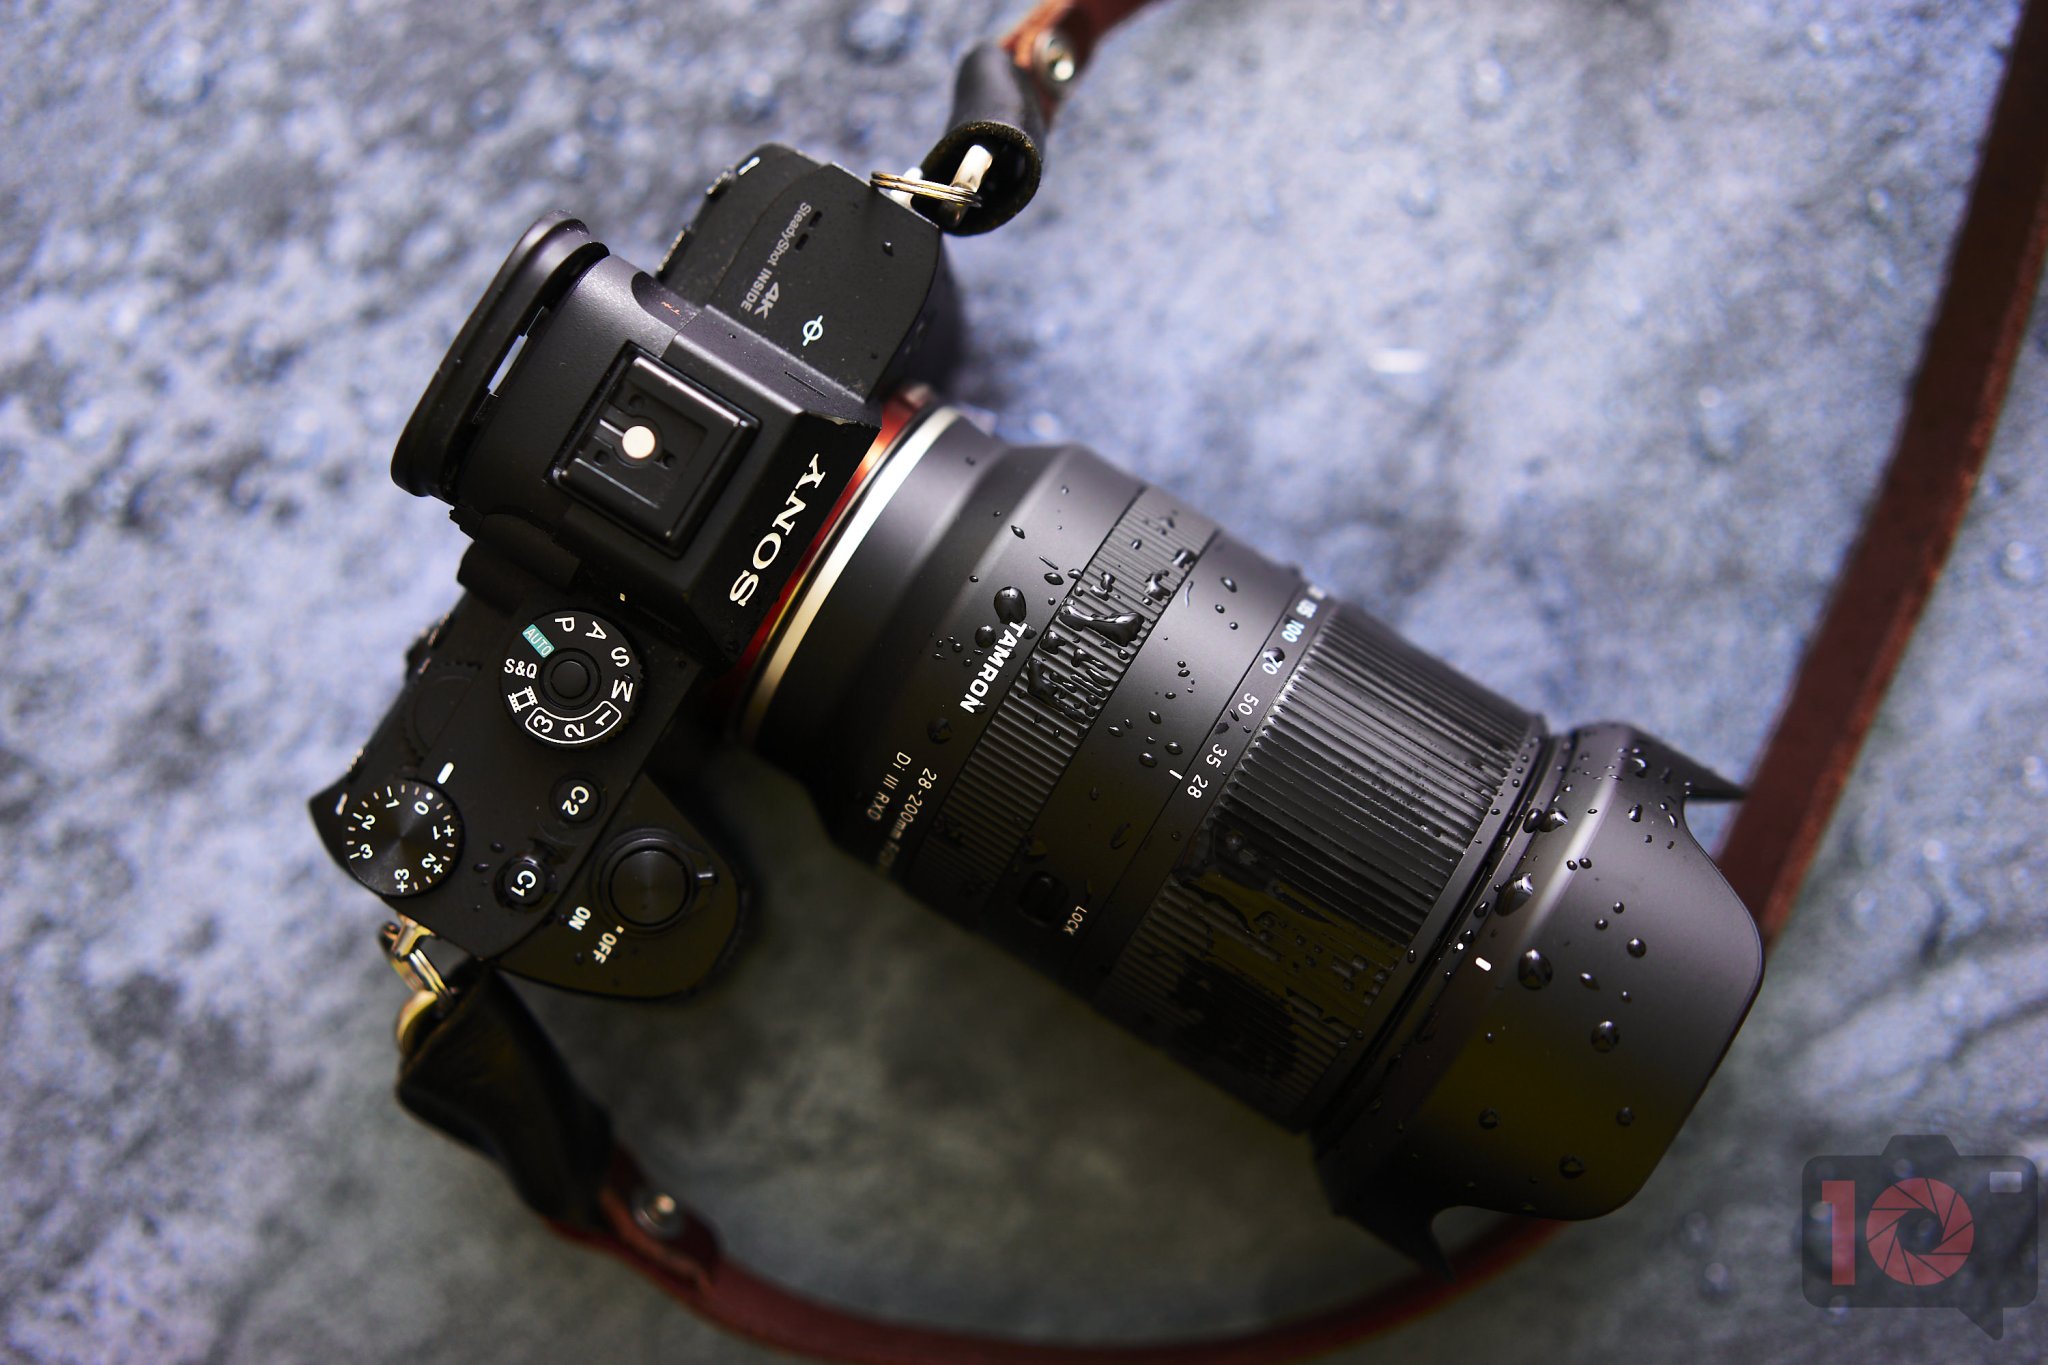 I Love This Lens: Tamron 28-200mm f2.8-5.6 Di III RXD Review